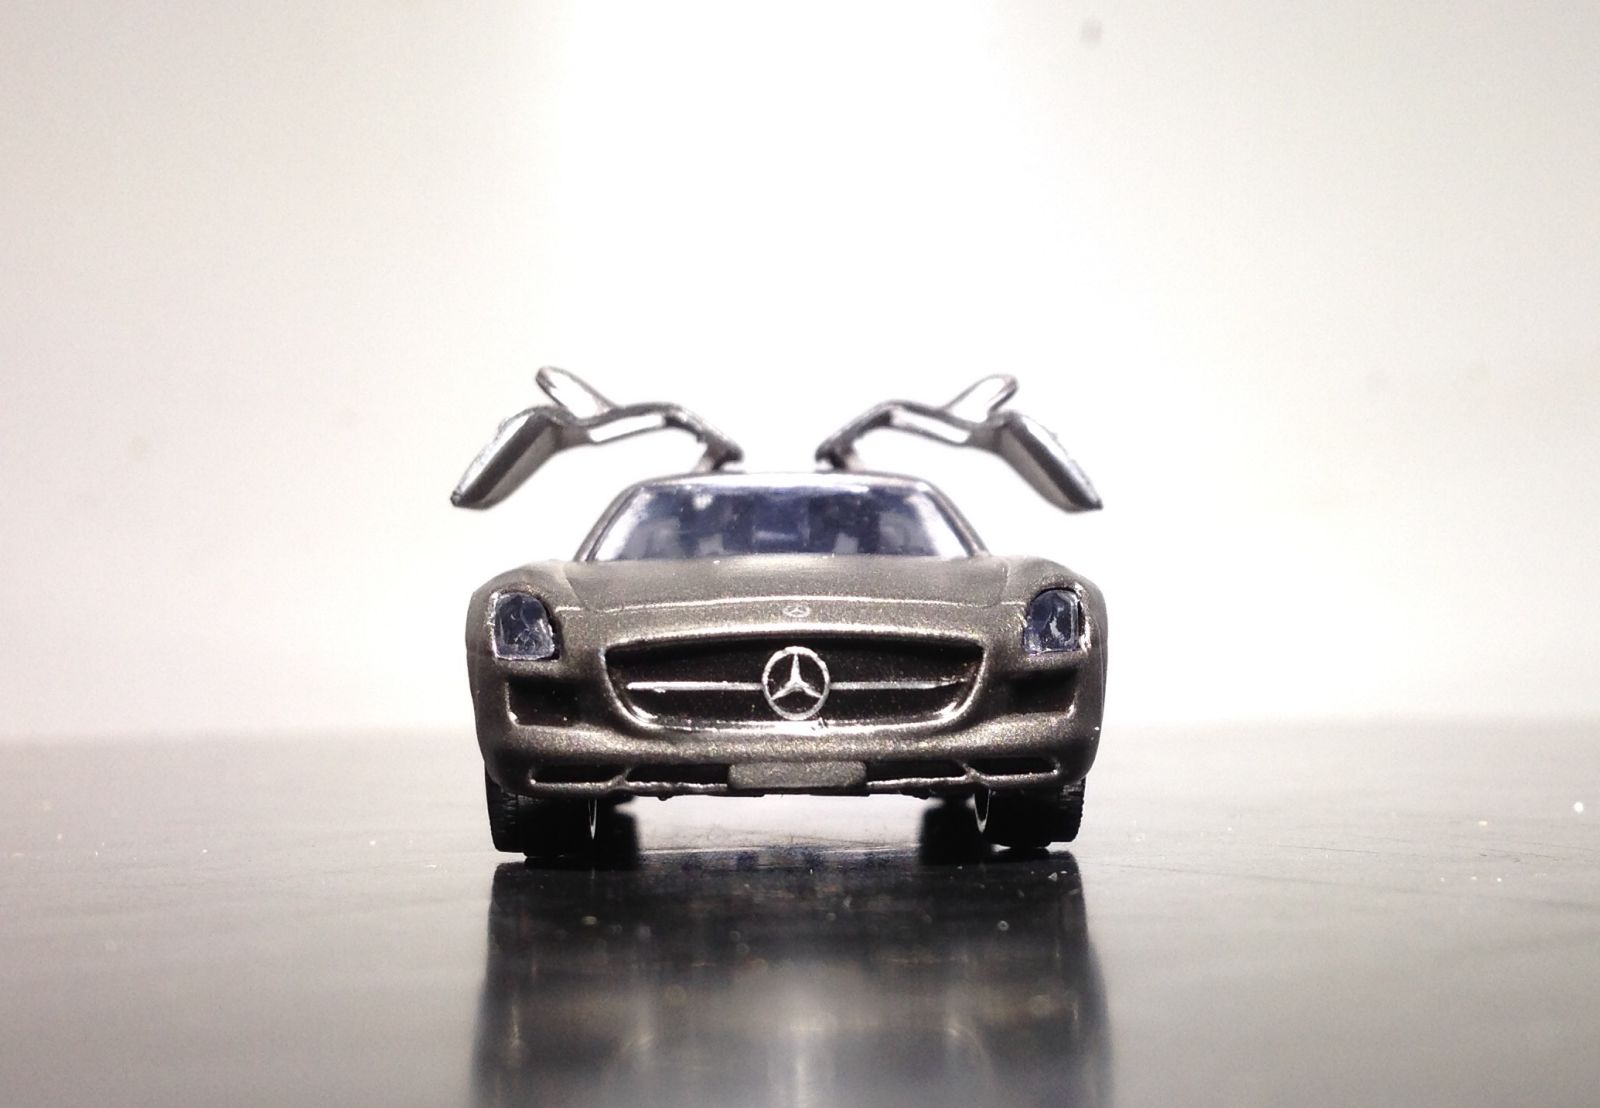 Illustration for article titled Teutonic Tuesday: Mercedes Benz SLS